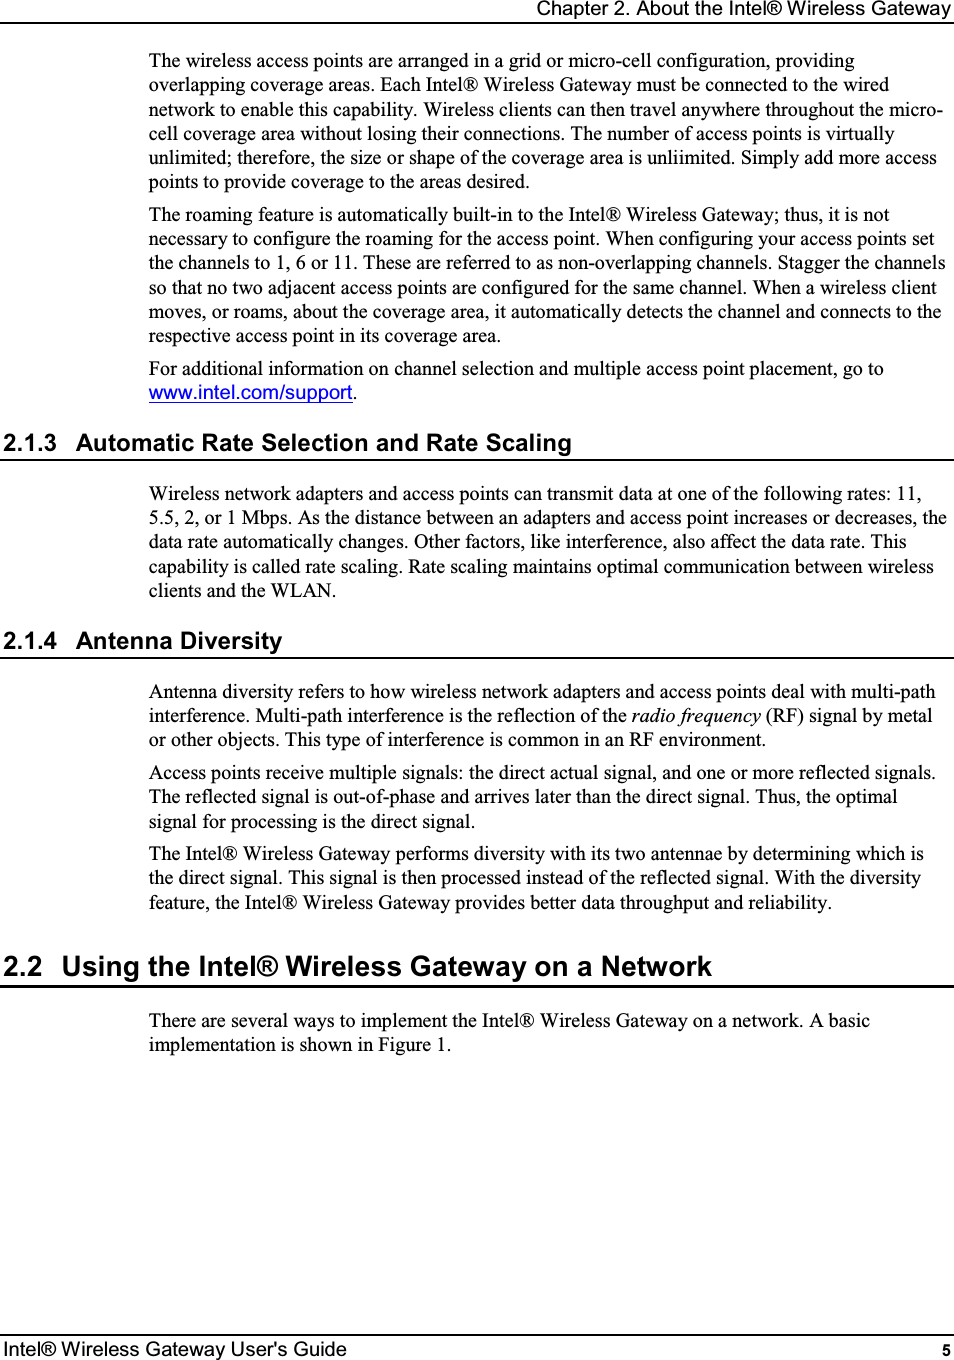 Chapter 2. About the Intel® Wireless Gateway Intel® Wireless Gateway User&apos;s Guide  5 The wireless access points are arranged in a grid or micro-cell configuration, providing overlapping coverage areas. Each Intel® Wireless Gateway must be connected to the wired network to enable this capability. Wireless clients can then travel anywhere throughout the micro-cell coverage area without losing their connections. The number of access points is virtually unlimited; therefore, the size or shape of the coverage area is unliimited. Simply add more access points to provide coverage to the areas desired. The roaming feature is automatically built-in to the Intel® Wireless Gateway; thus, it is not necessary to configure the roaming for the access point. When configuring your access points set the channels to 1, 6 or 11. These are referred to as non-overlapping channels. Stagger the channels so that no two adjacent access points are configured for the same channel. When a wireless client moves, or roams, about the coverage area, it automatically detects the channel and connects to the respective access point in its coverage area. For additional information on channel selection and multiple access point placement, go to www.intel.com/support. 2.1.3  Automatic Rate Selection and Rate Scaling Wireless network adapters and access points can transmit data at one of the following rates: 11, 5.5, 2, or 1 Mbps. As the distance between an adapters and access point increases or decreases, the data rate automatically changes. Other factors, like interference, also affect the data rate. This capability is called rate scaling. Rate scaling maintains optimal communication between wireless clients and the WLAN. 2.1.4  Antenna Diversity Antenna diversity refers to how wireless network adapters and access points deal with multi-path interference. Multi-path interference is the reflection of the radio frequency (RF) signal by metal or other objects. This type of interference is common in an RF environment. Access points receive multiple signals: the direct actual signal, and one or more reflected signals. The reflected signal is out-of-phase and arrives later than the direct signal. Thus, the optimal signal for processing is the direct signal. The Intel® Wireless Gateway performs diversity with its two antennae by determining which is the direct signal. This signal is then processed instead of the reflected signal. With the diversity feature, the Intel® Wireless Gateway provides better data throughput and reliability. 2.2  Using the Intel® Wireless Gateway on a Network There are several ways to implement the Intel® Wireless Gateway on a network. A basic implementation is shown in Figure 1.         